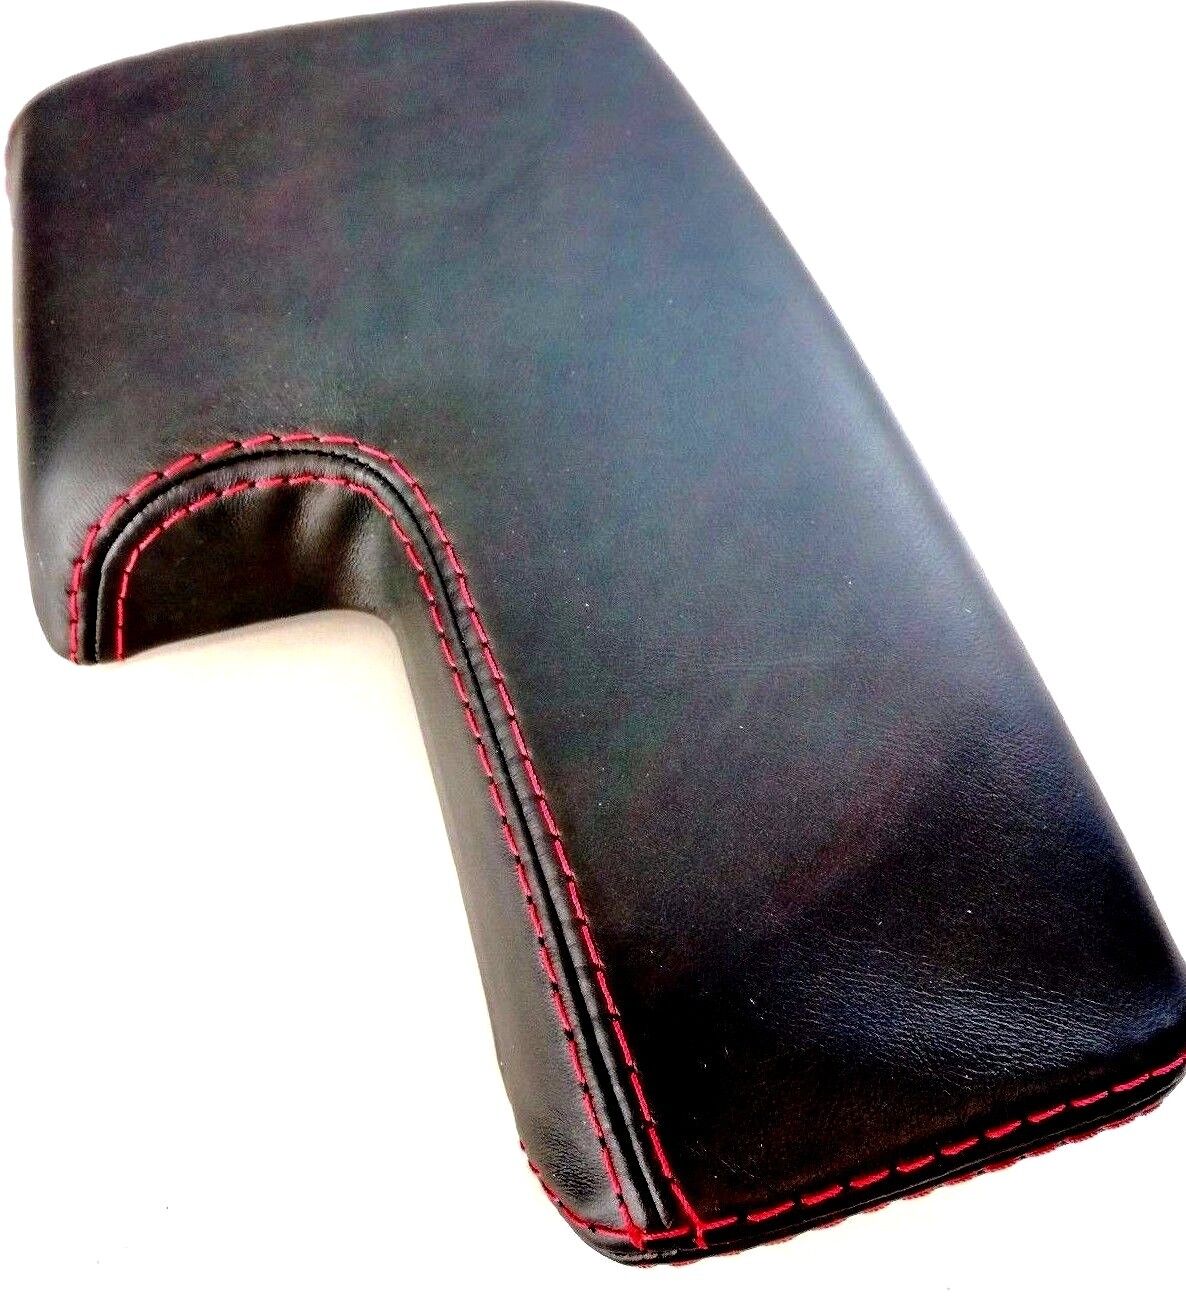 Alpha Romeo Brera Spider Cover Black Leather For Armrest Red Stitching